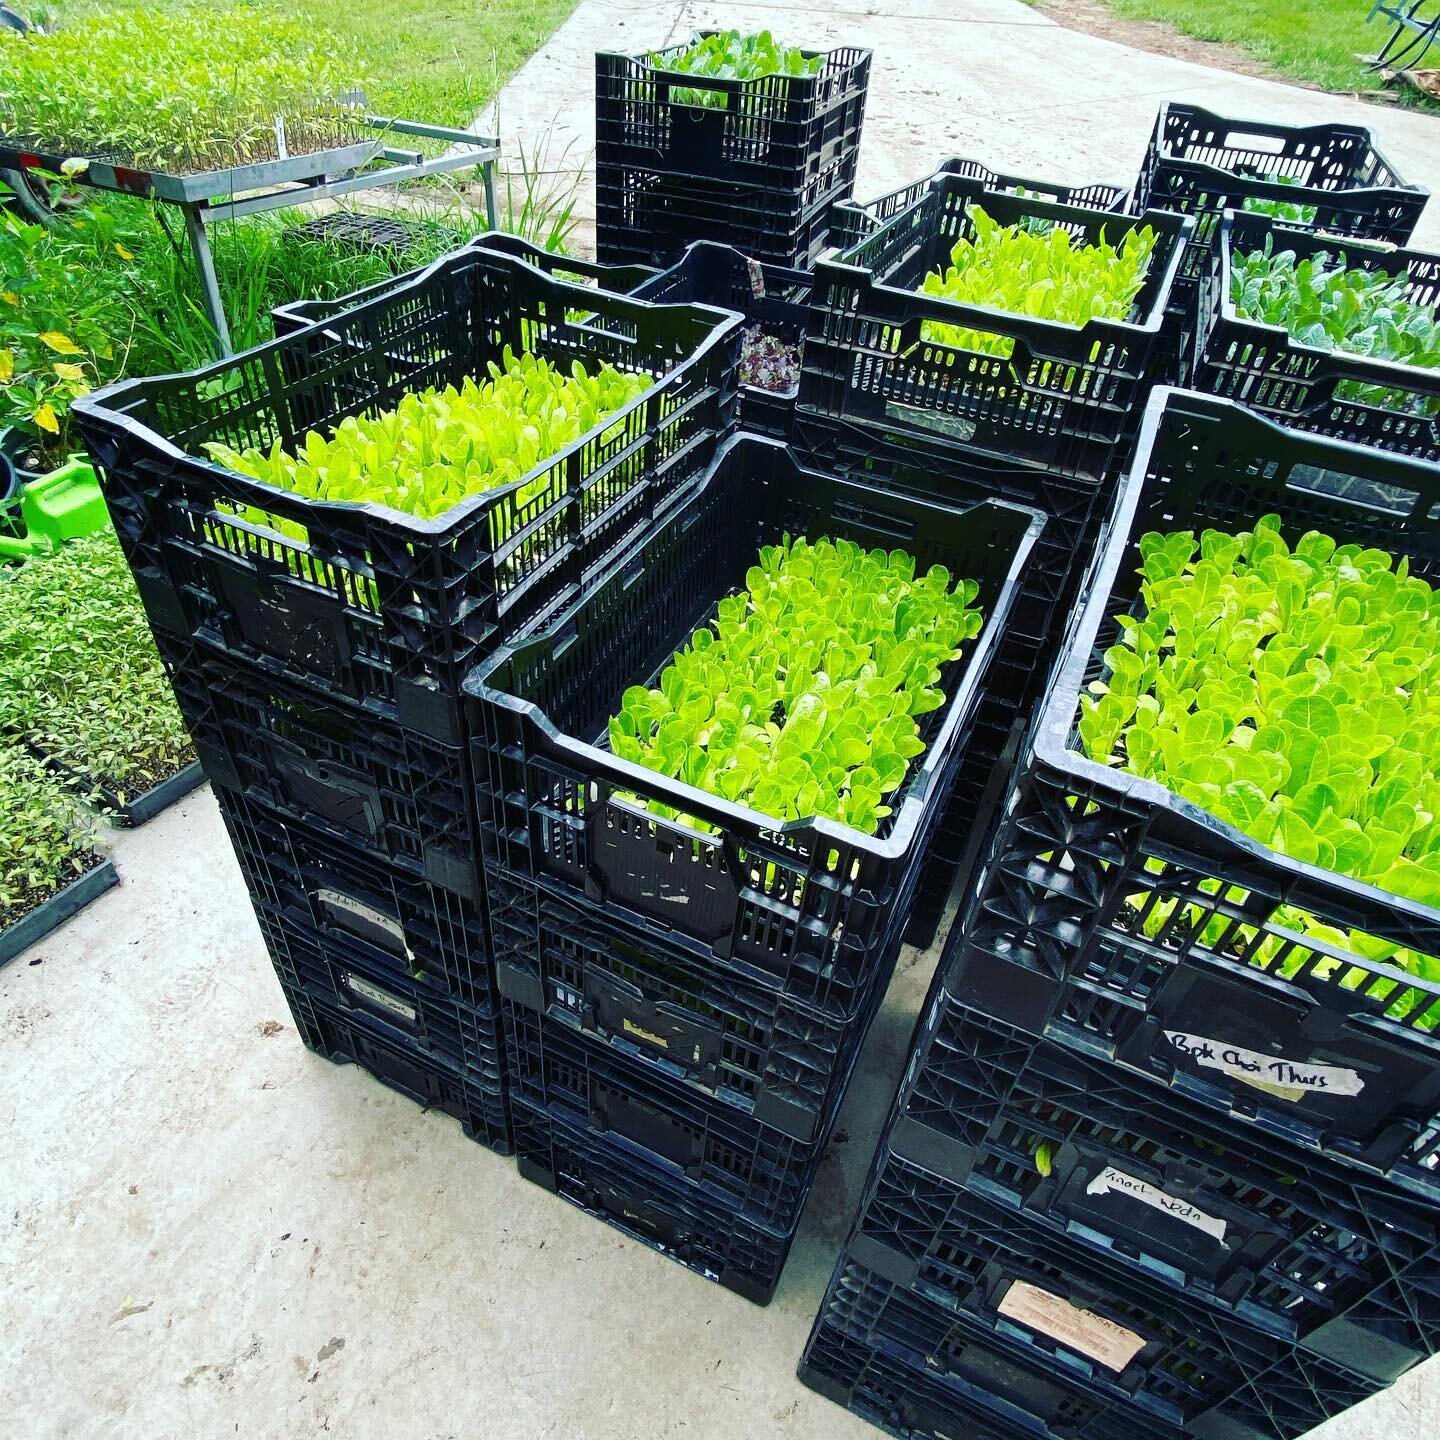 A sneaky pic of over 7,000 seedlings which will start to make their way into our rich soil tomorrow in preparation for our winter crop. Plantation had started early this week and will continue into next. Feel free to join us tomorrow and get your fin